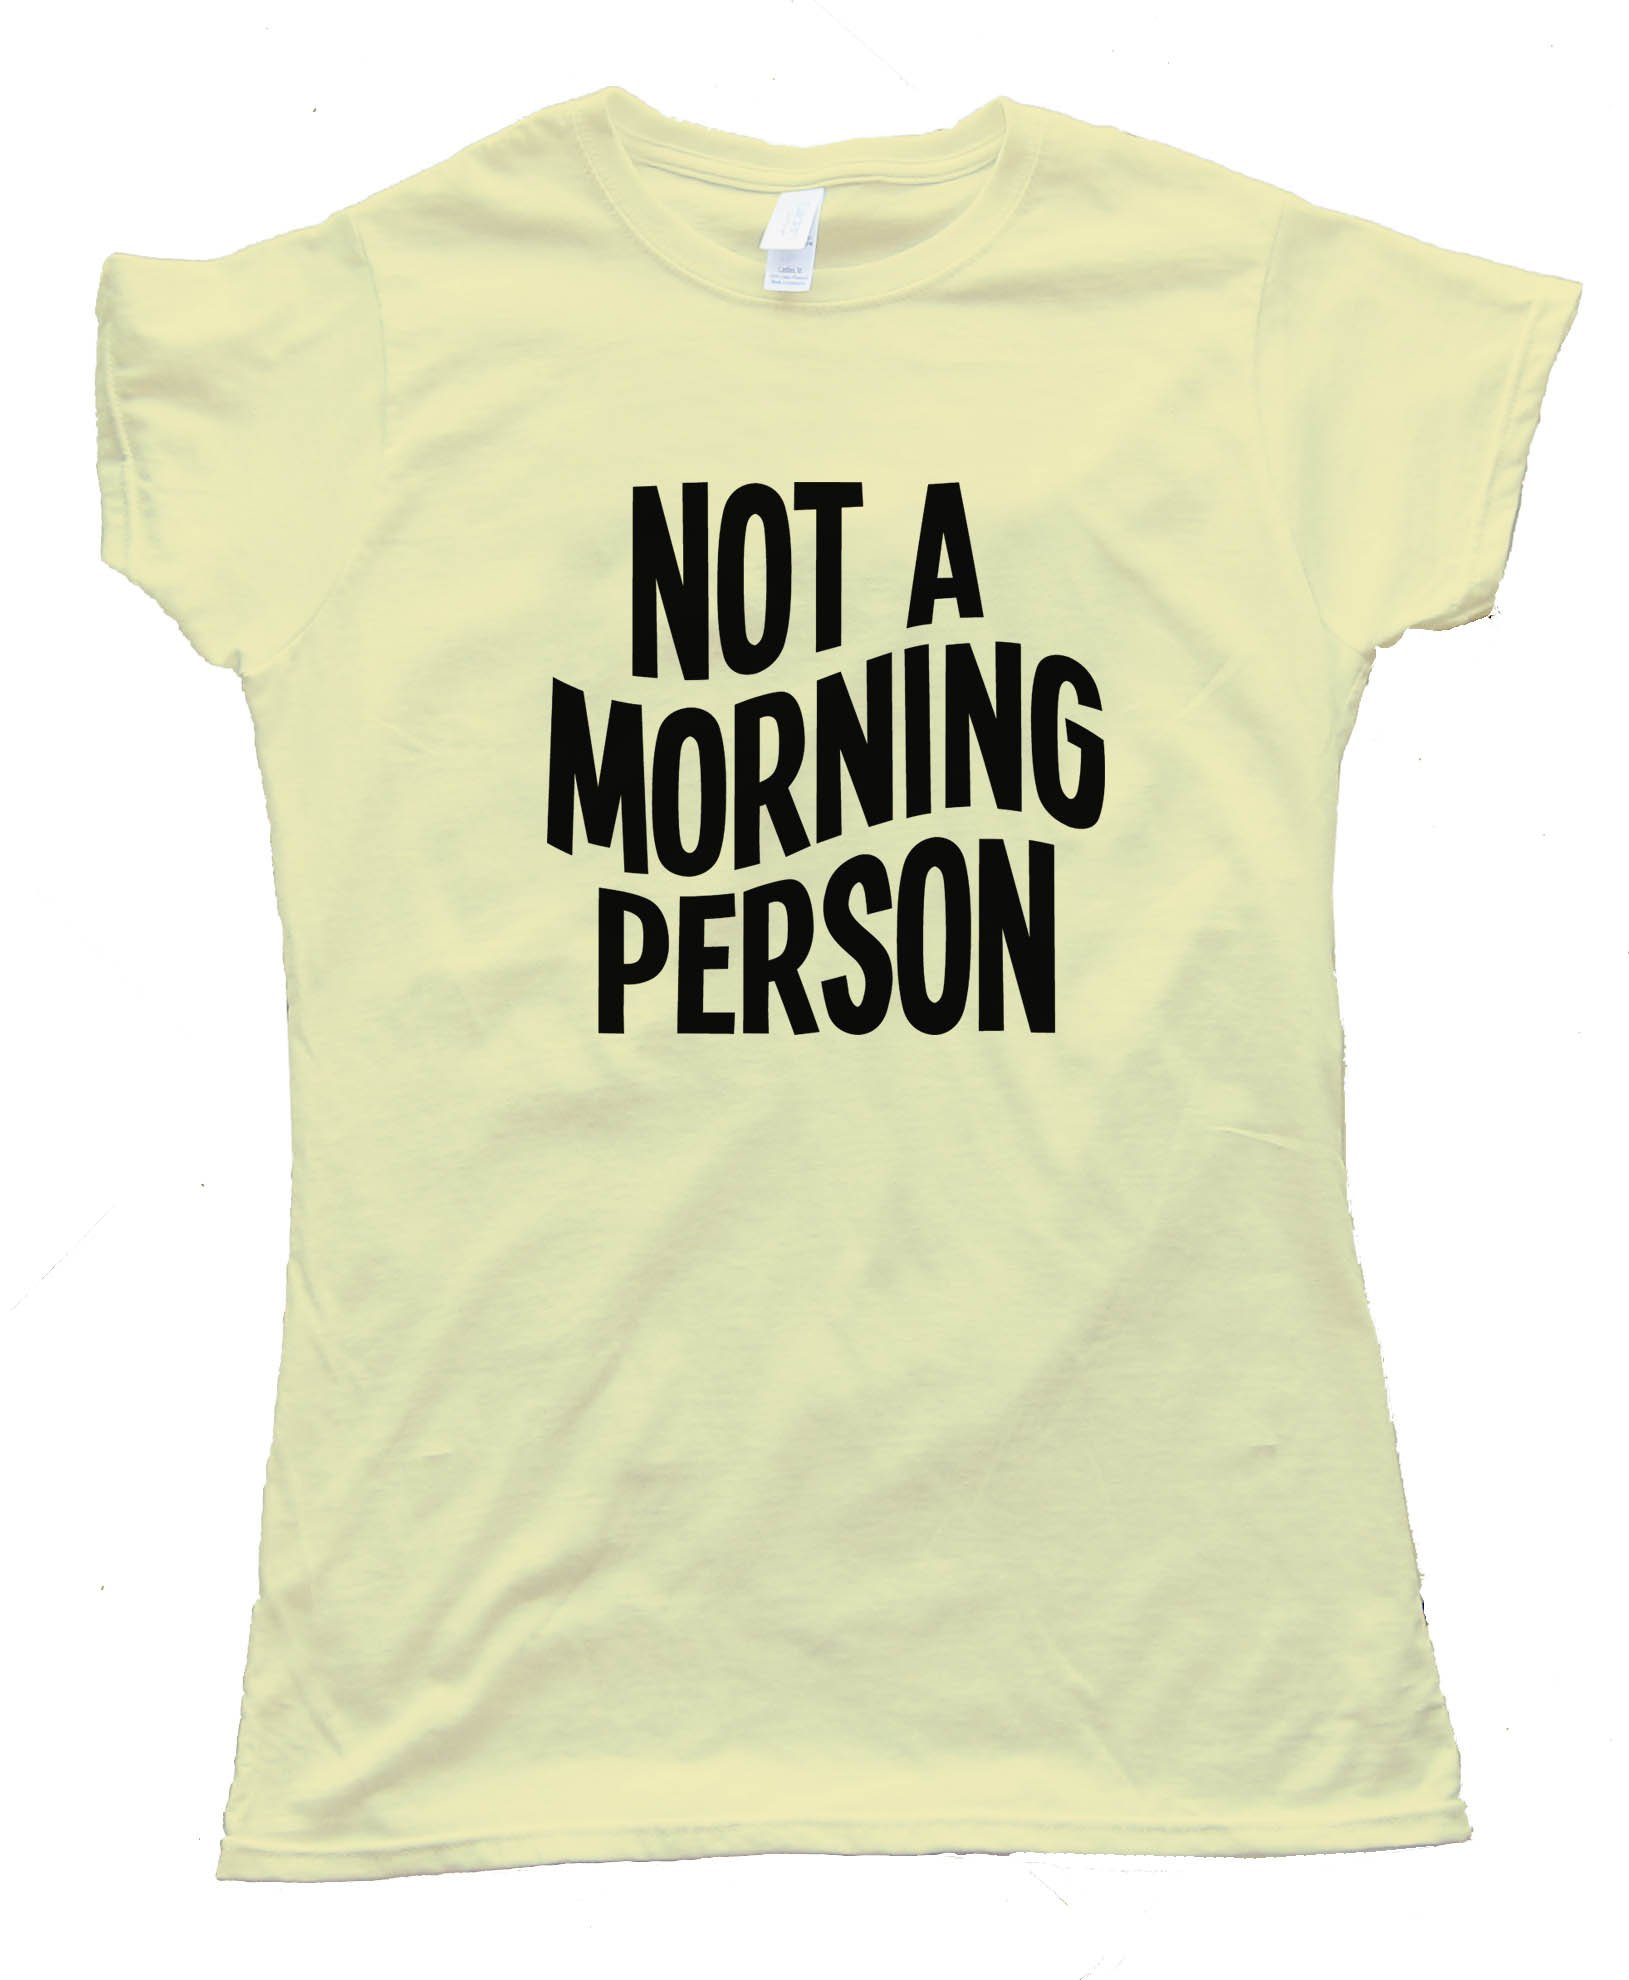 Not A Morning Person Tee Shirt